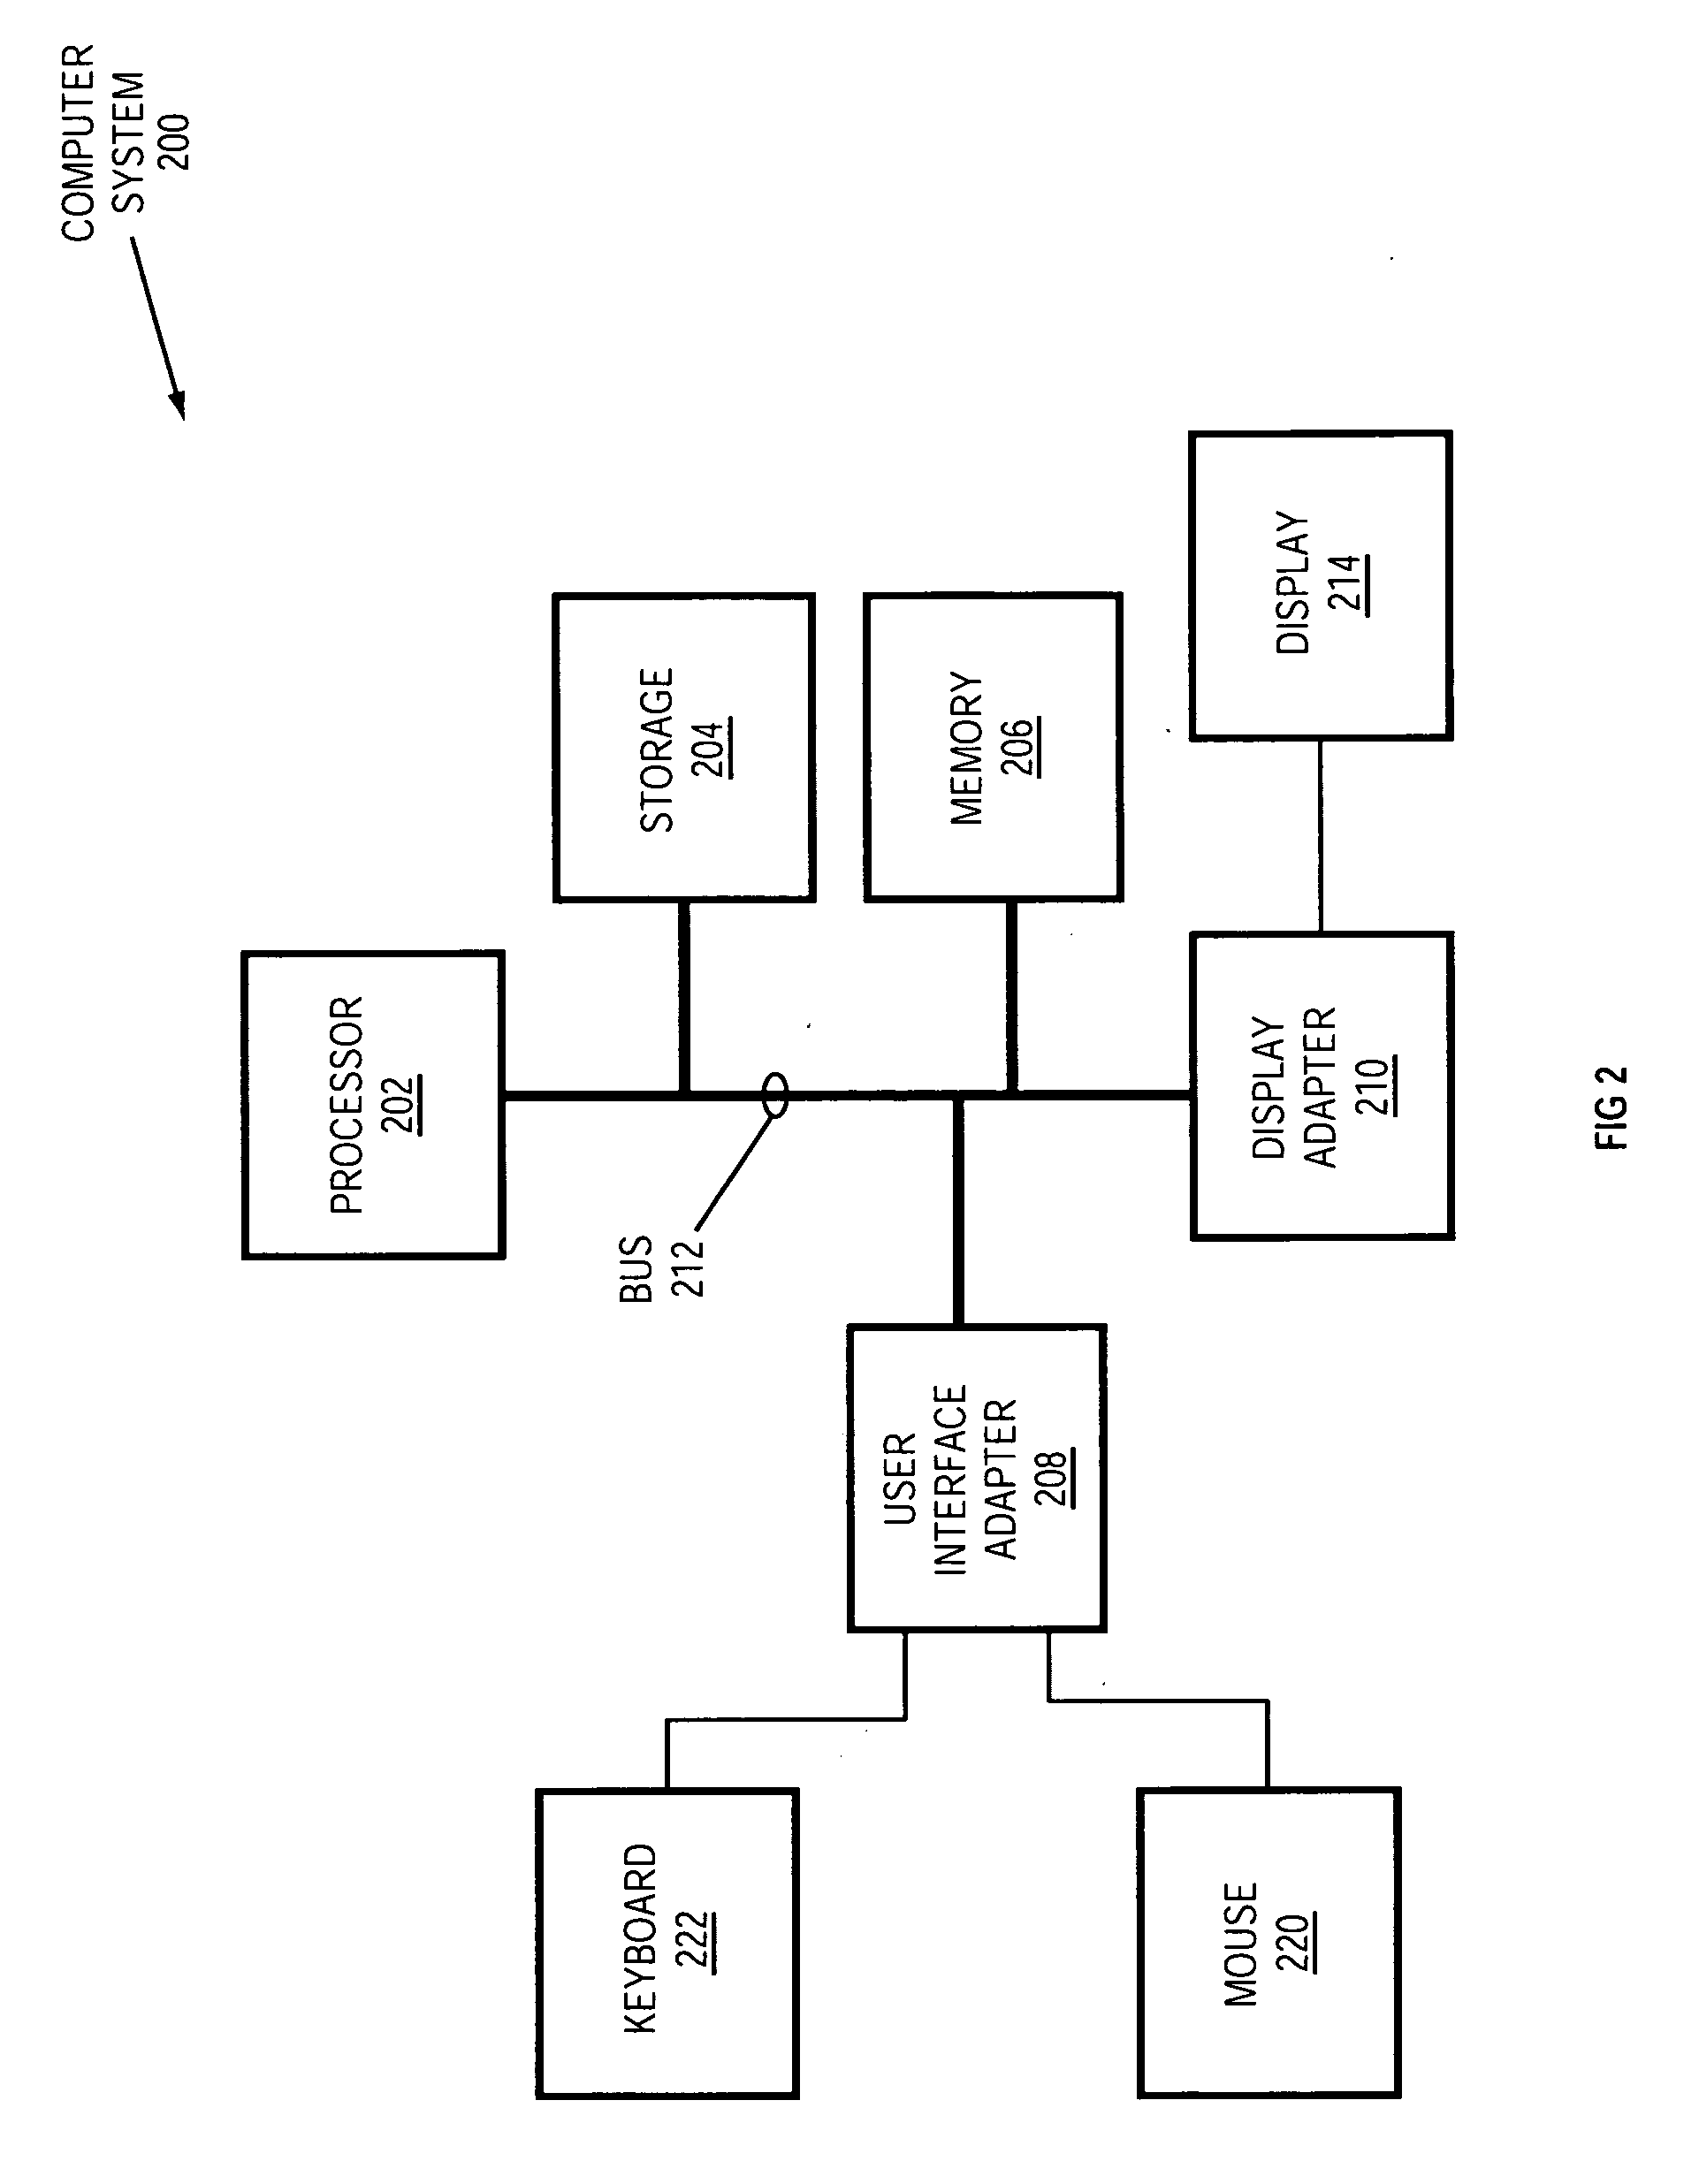 Communication profiles for integrated database messaging system